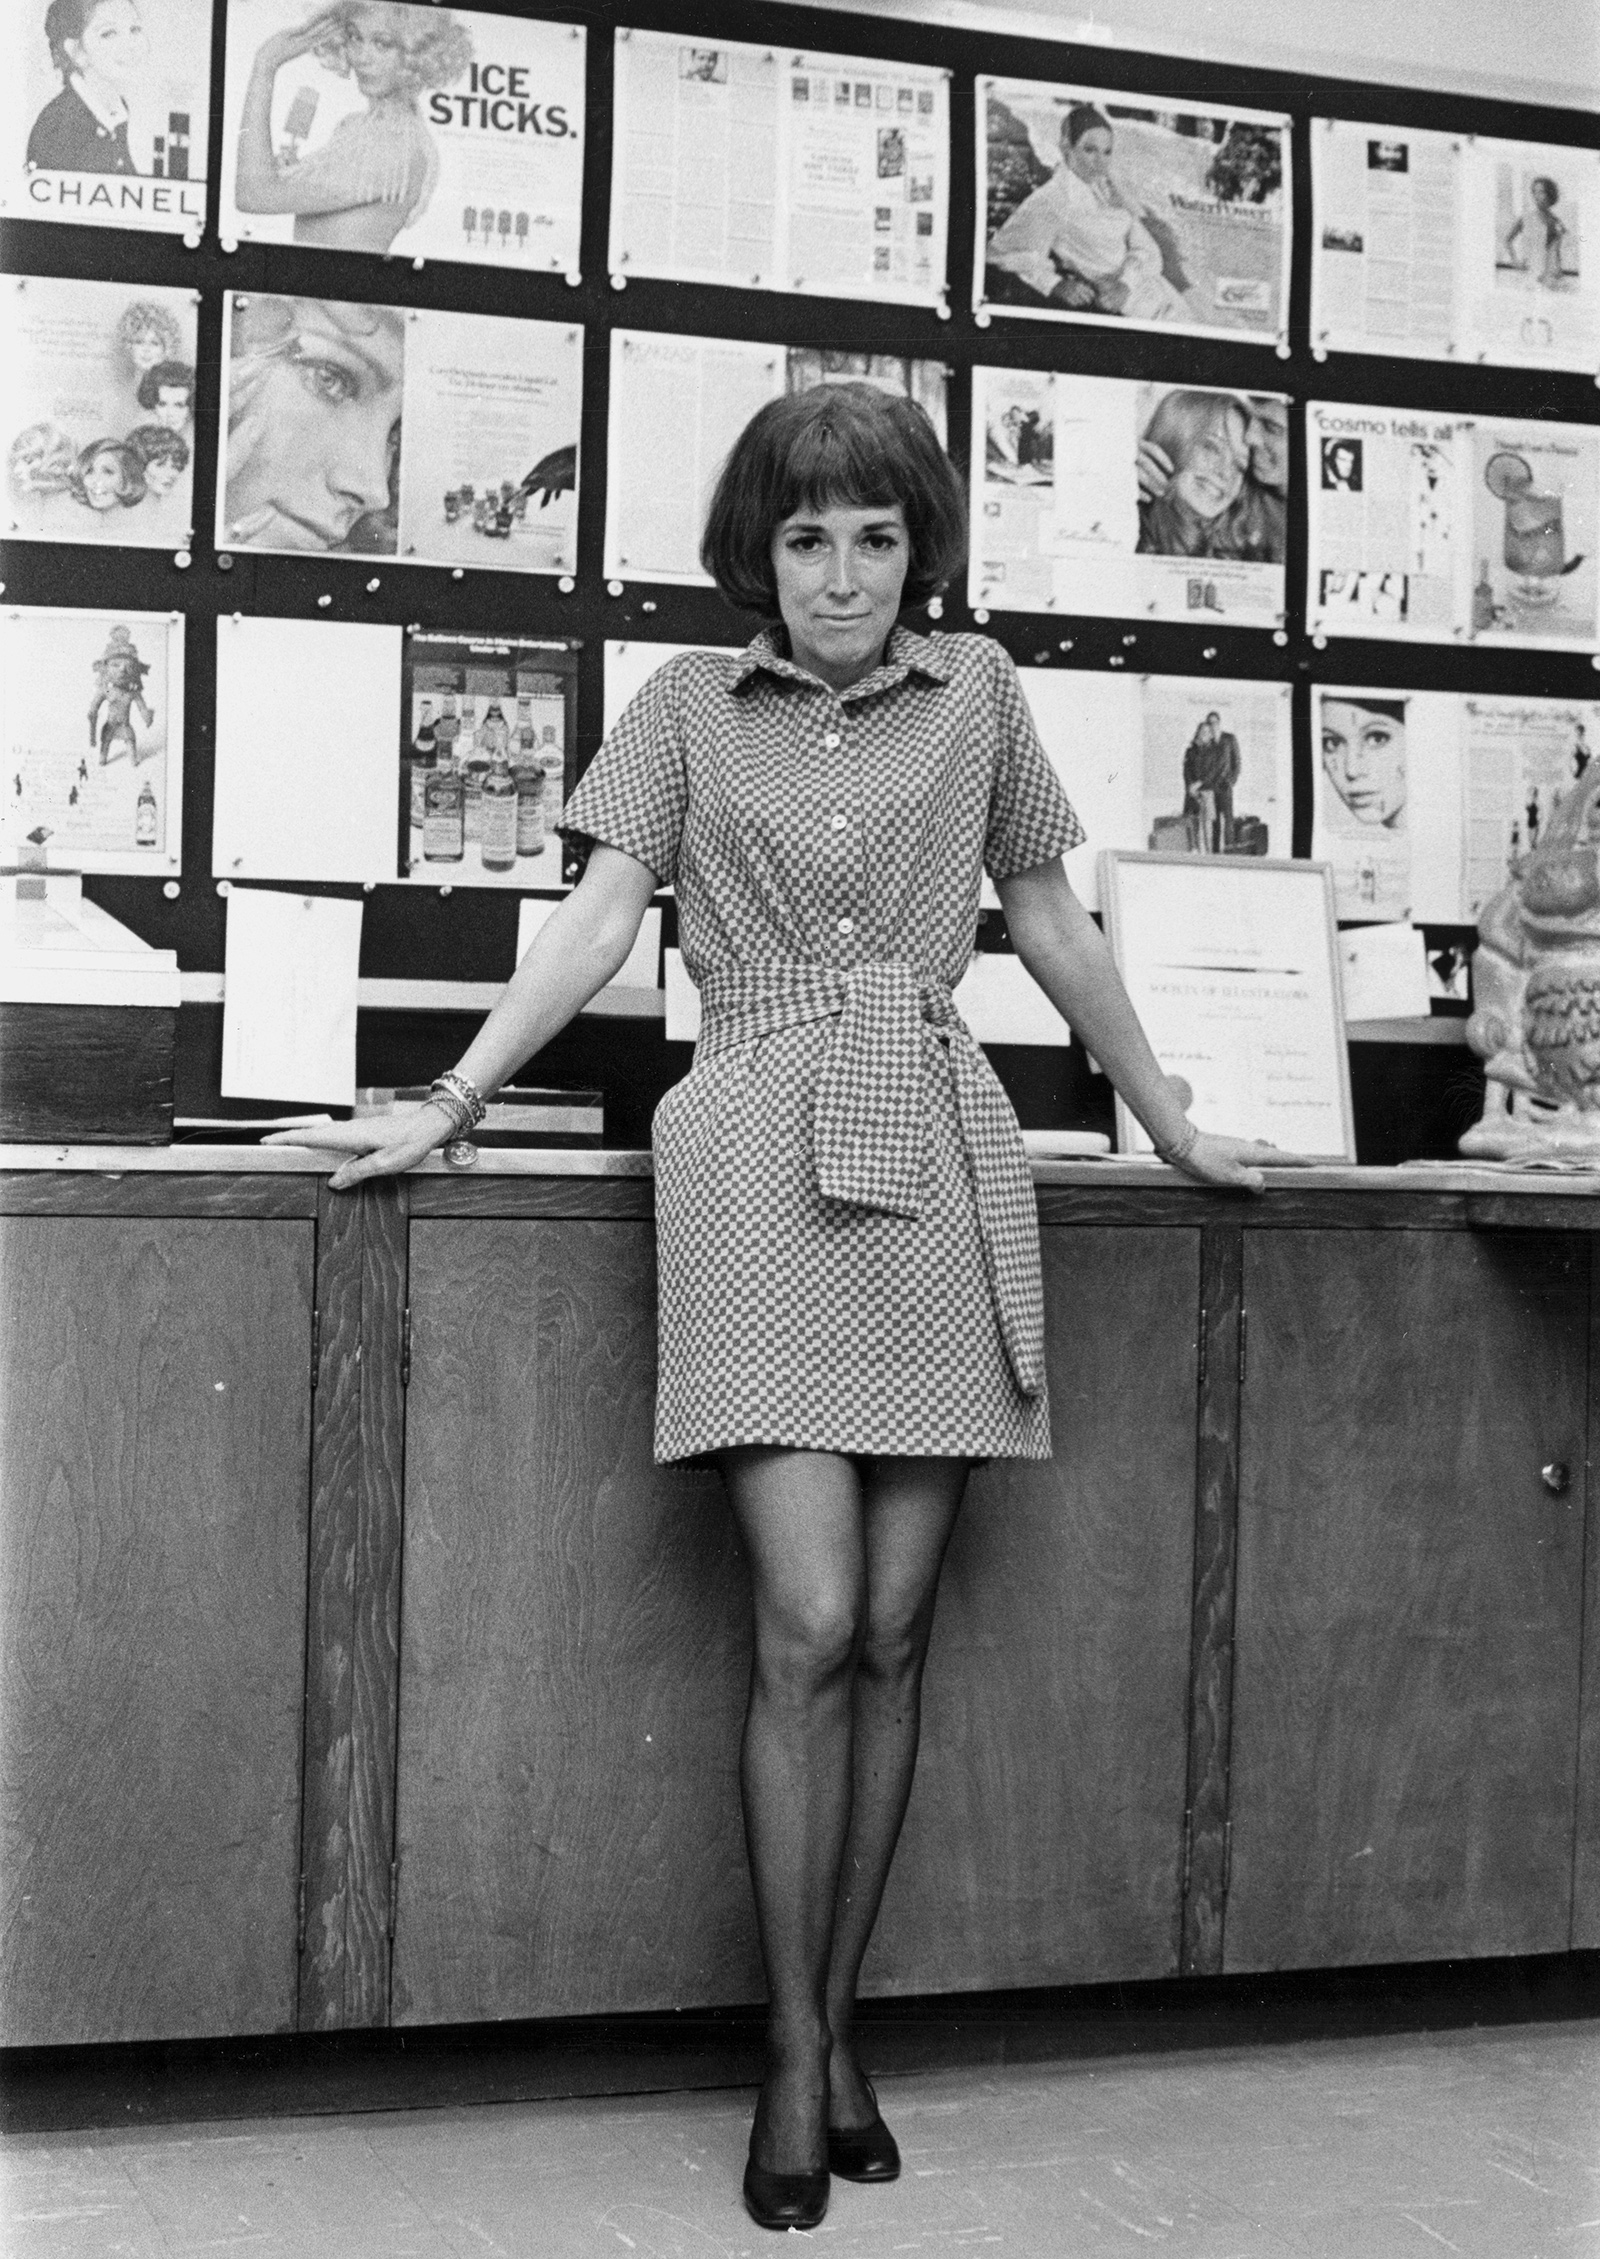 Helen Gurley Brown in the art department of Cosmopolitan shortly after becoming editor in chief, New York City, March 1965